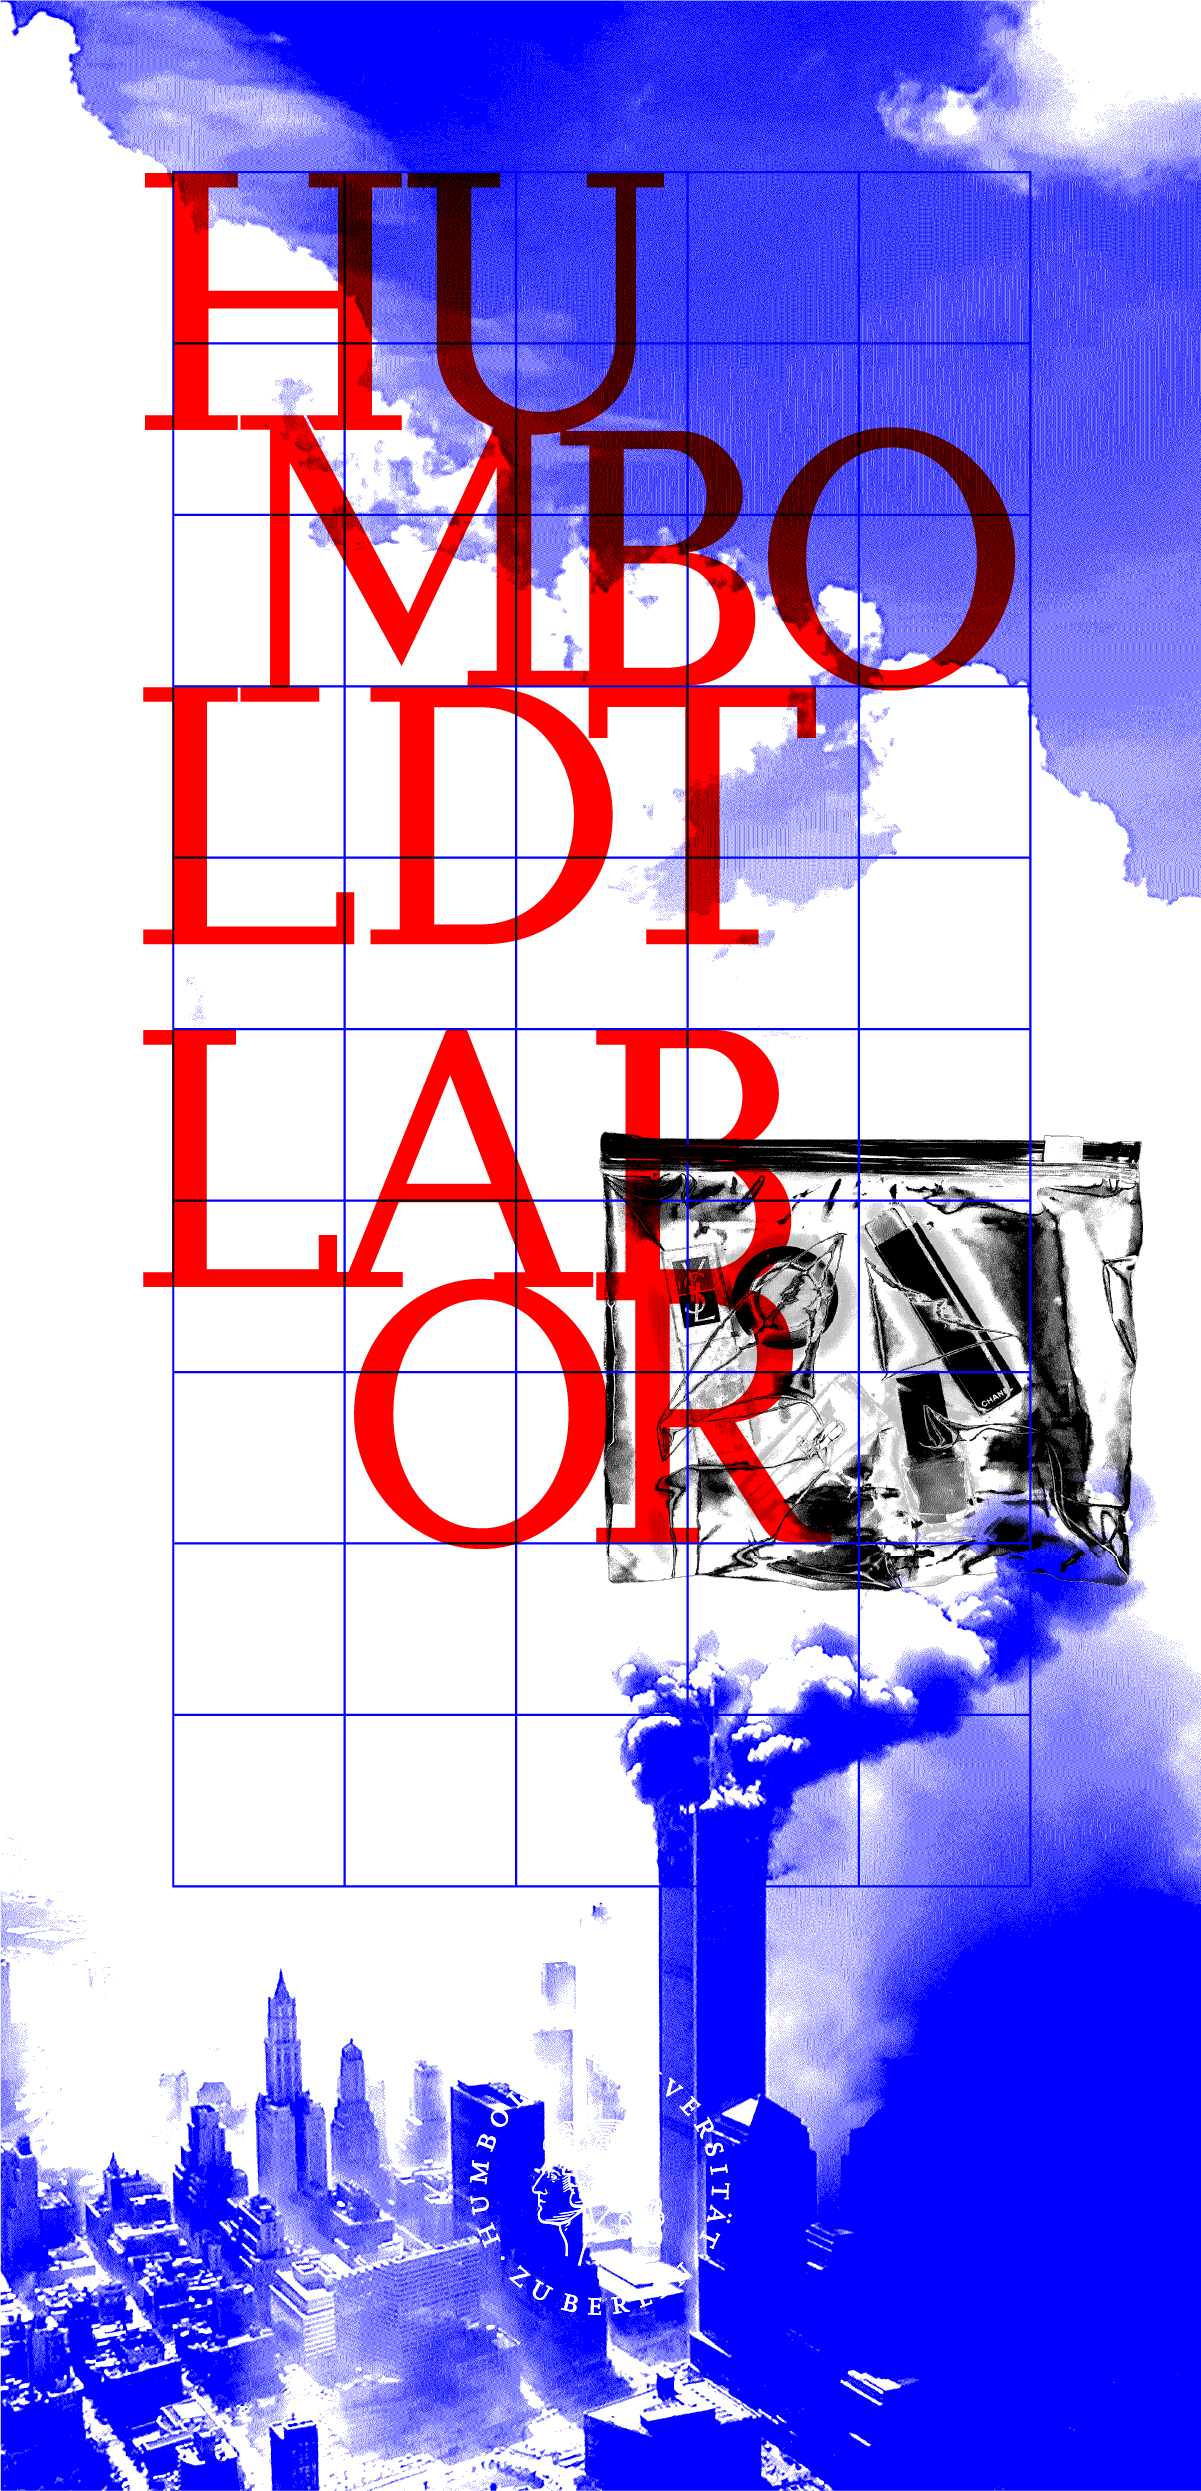 A collage illustration in long format. The blue background image is an areal view of the burning world trade center. Other elements are an x-ray view of a washbag, a grid and the headline: Humboldt Labor, that is piled up over multiple lines.